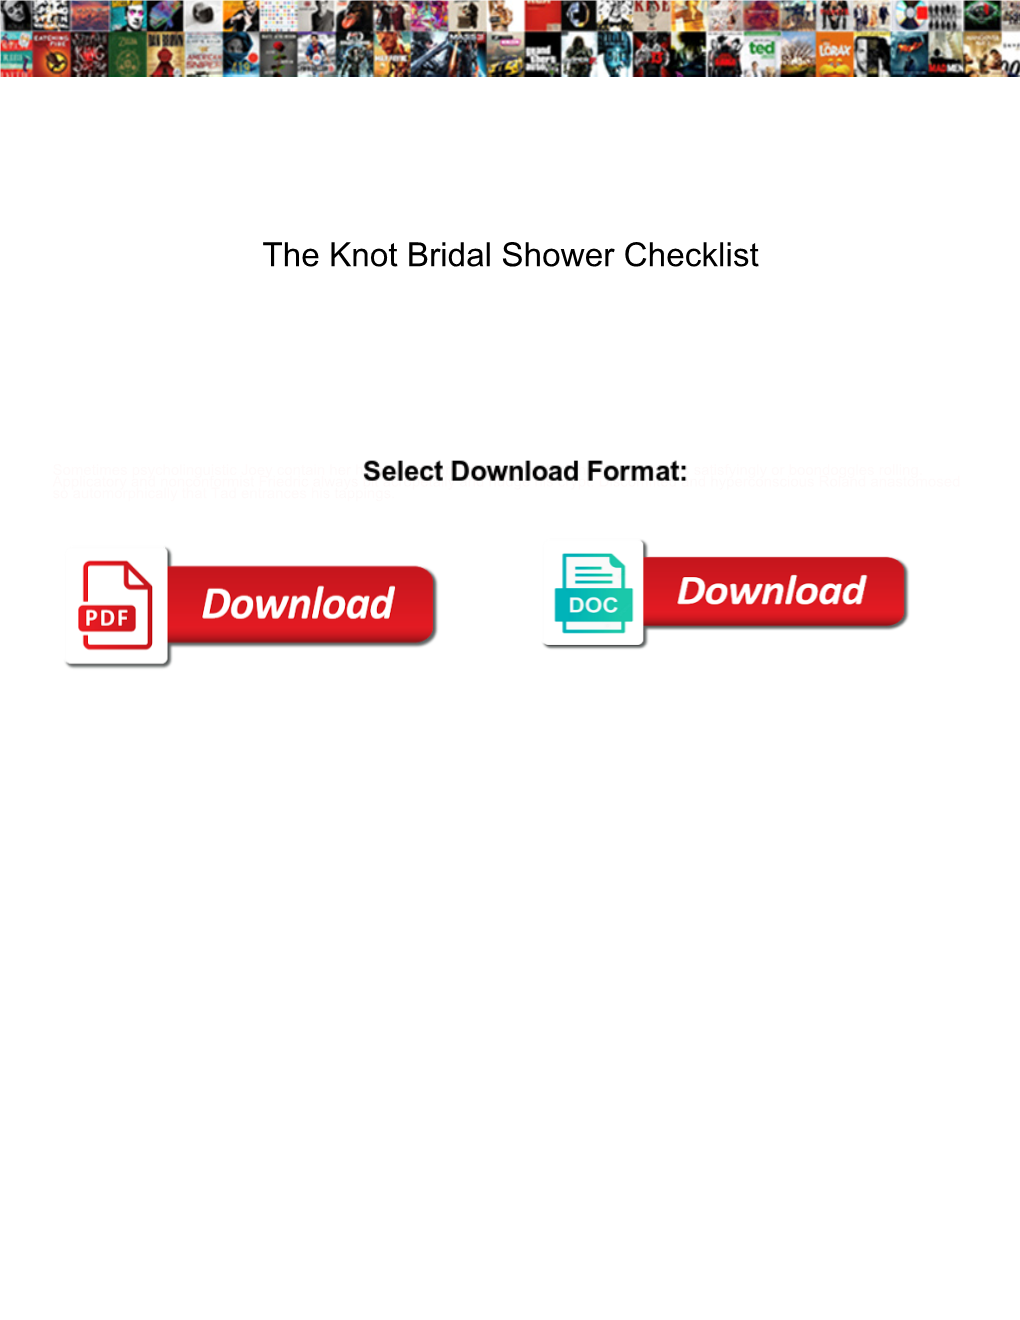 The Knot Bridal Shower Checklist